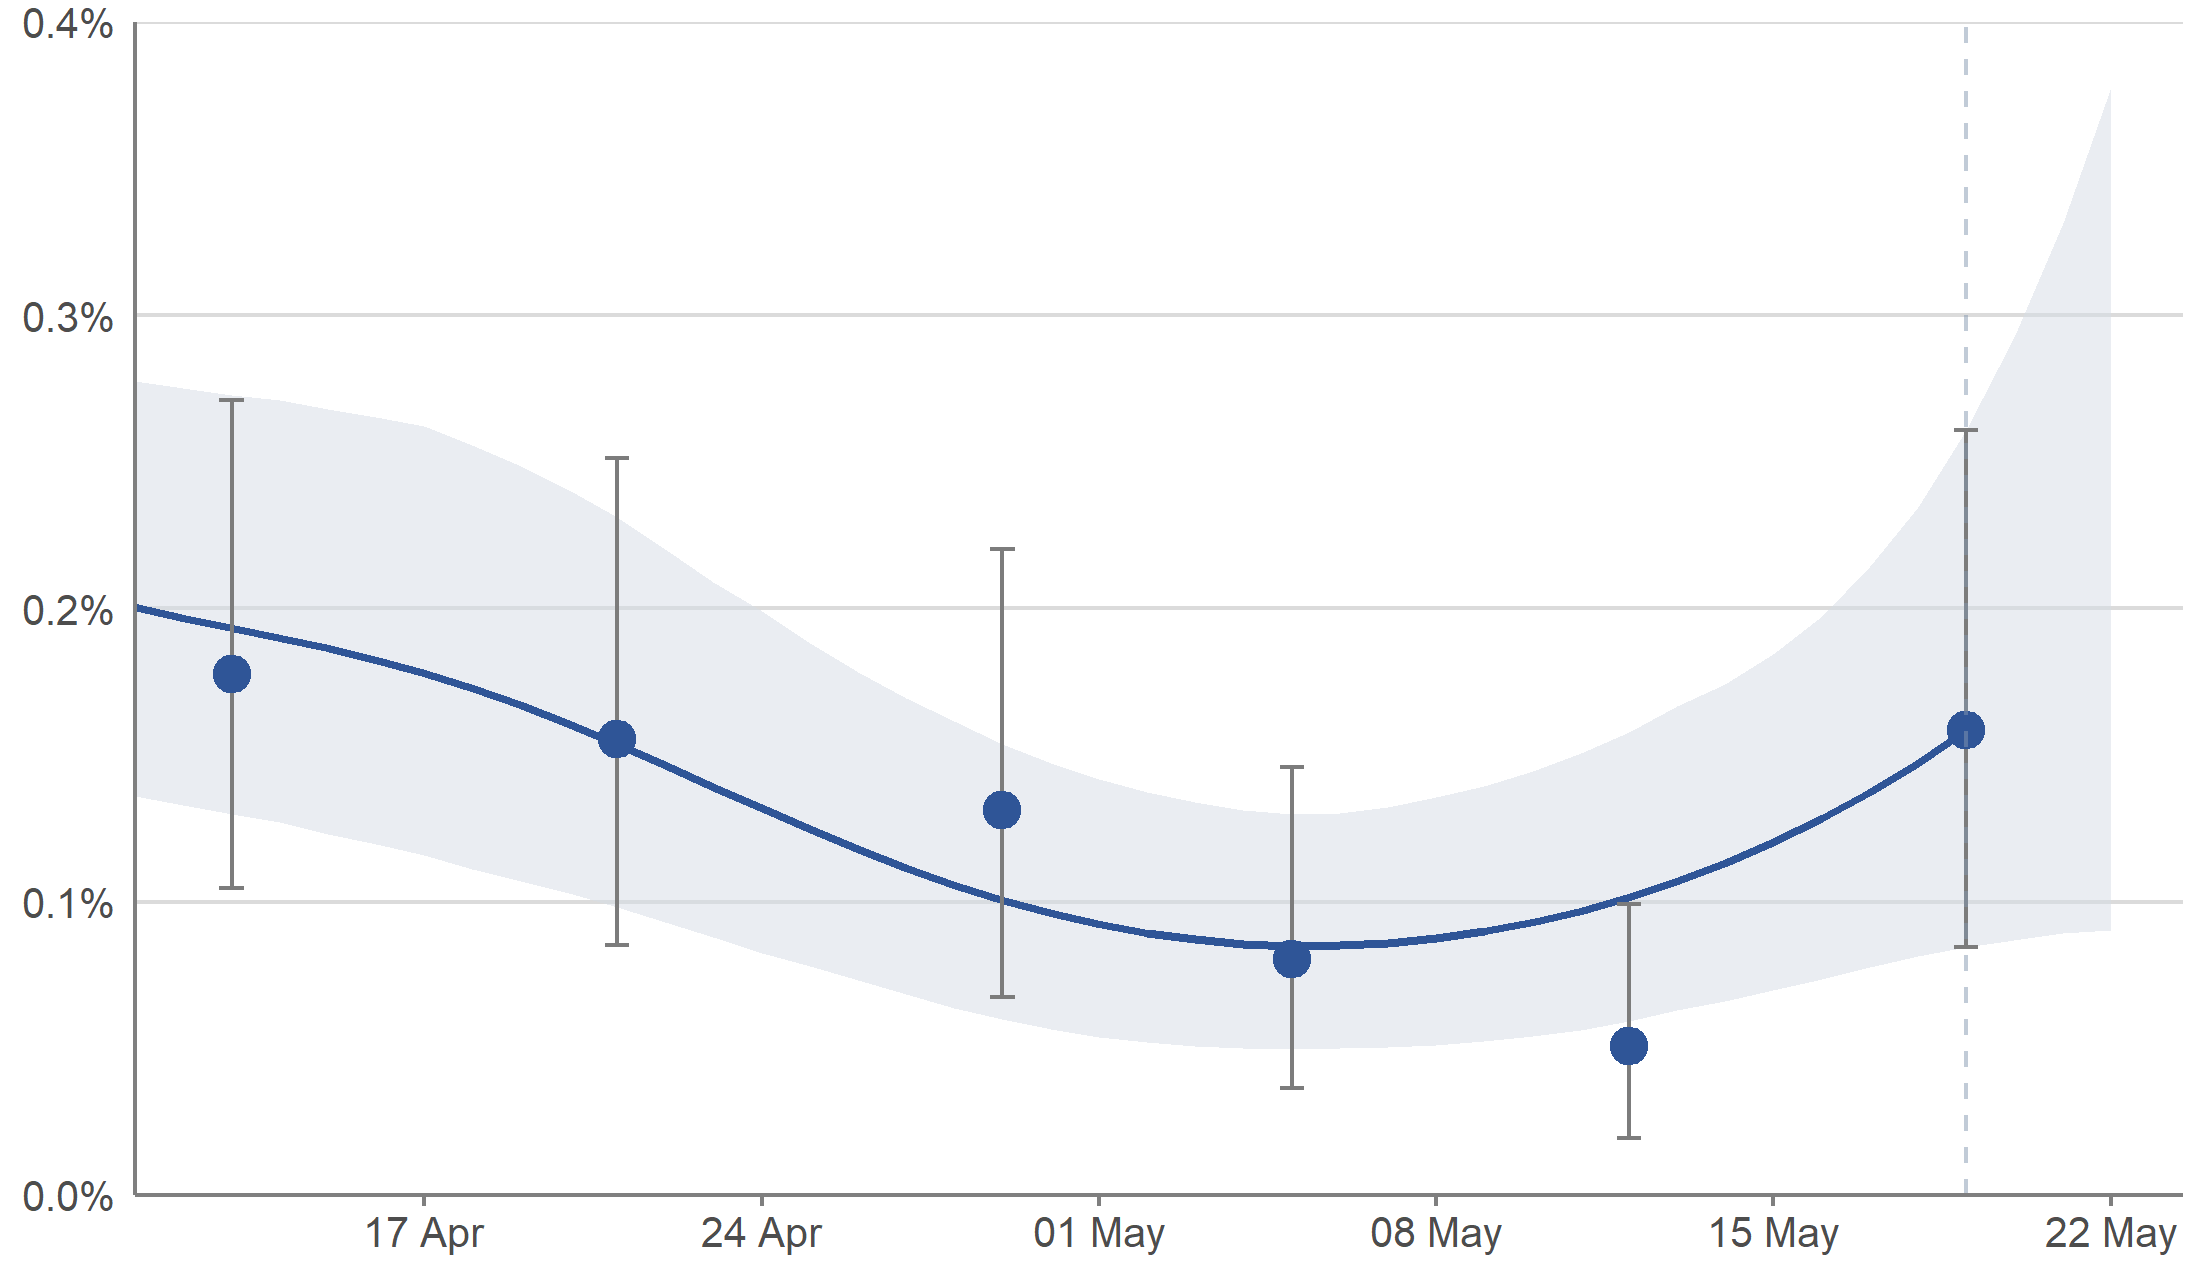 Modelled daily estimates and official reported estimates of the percentage of the community population in Scotland testing positive for COVID-19 between 11 April and 22 May 2021, including 95% credible intervals